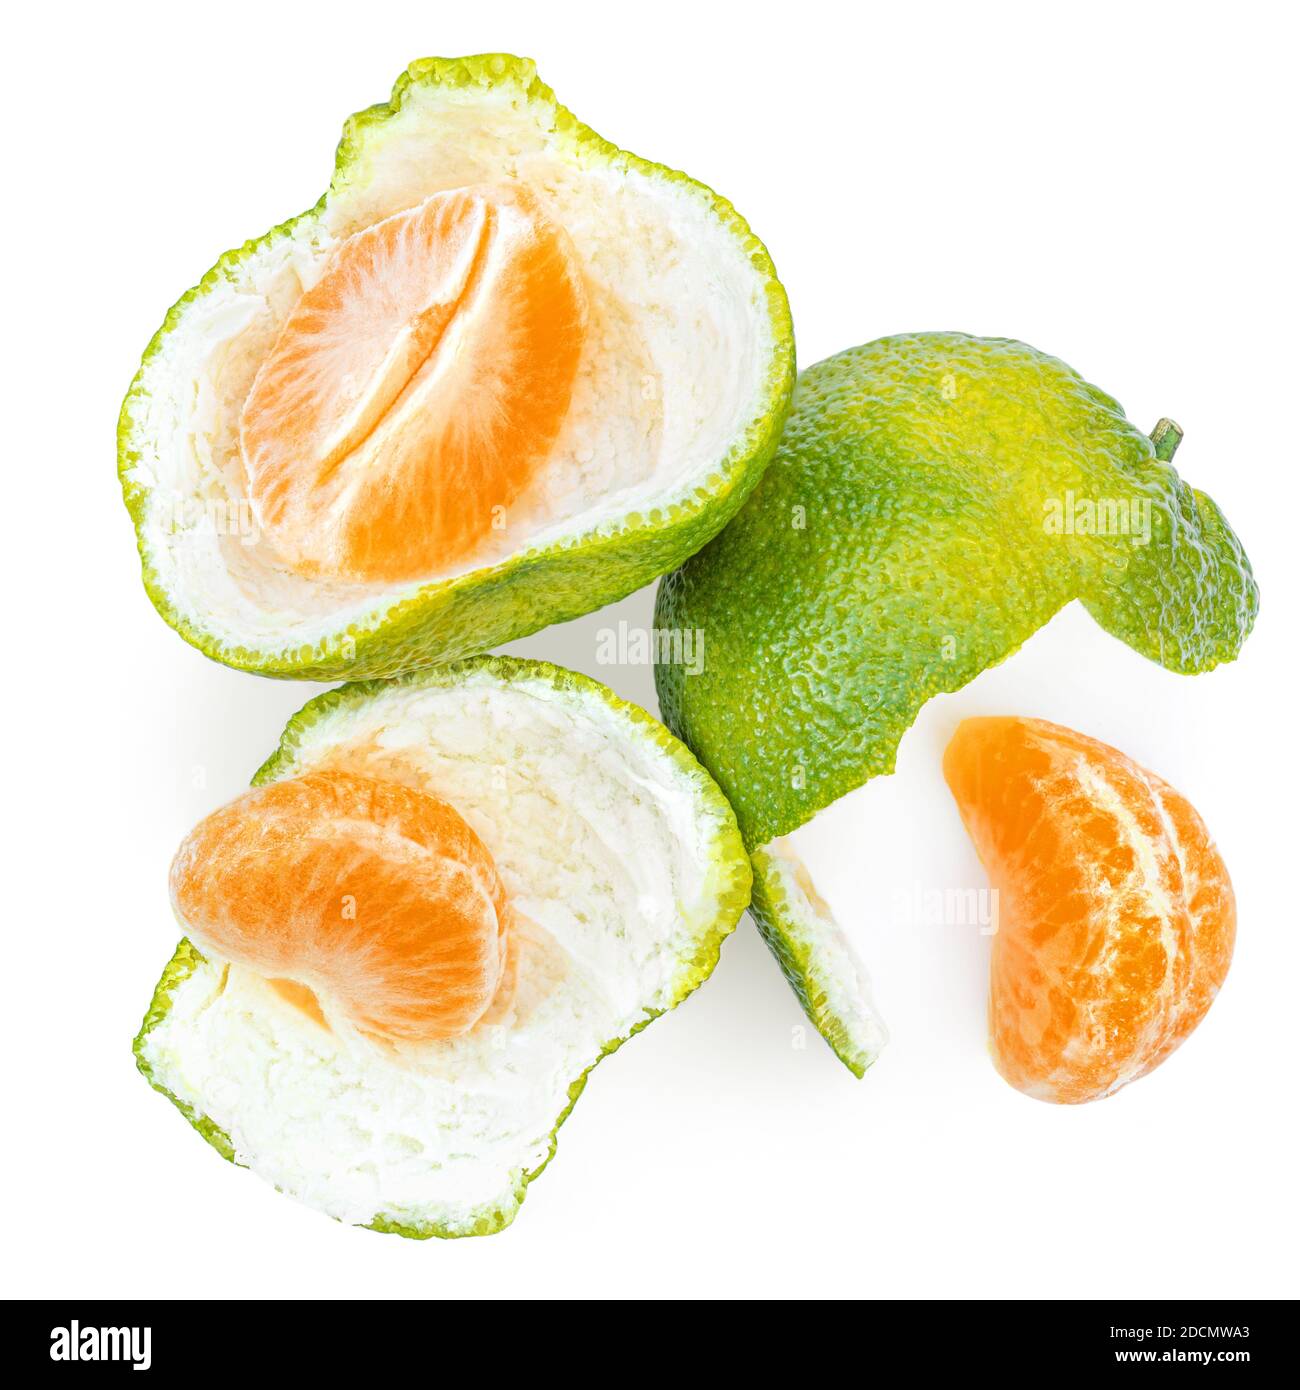 Tangerine fruit  (clementine, mandarines) slices with peel   isolated on white background. Top view. Flat lay Stock Photo